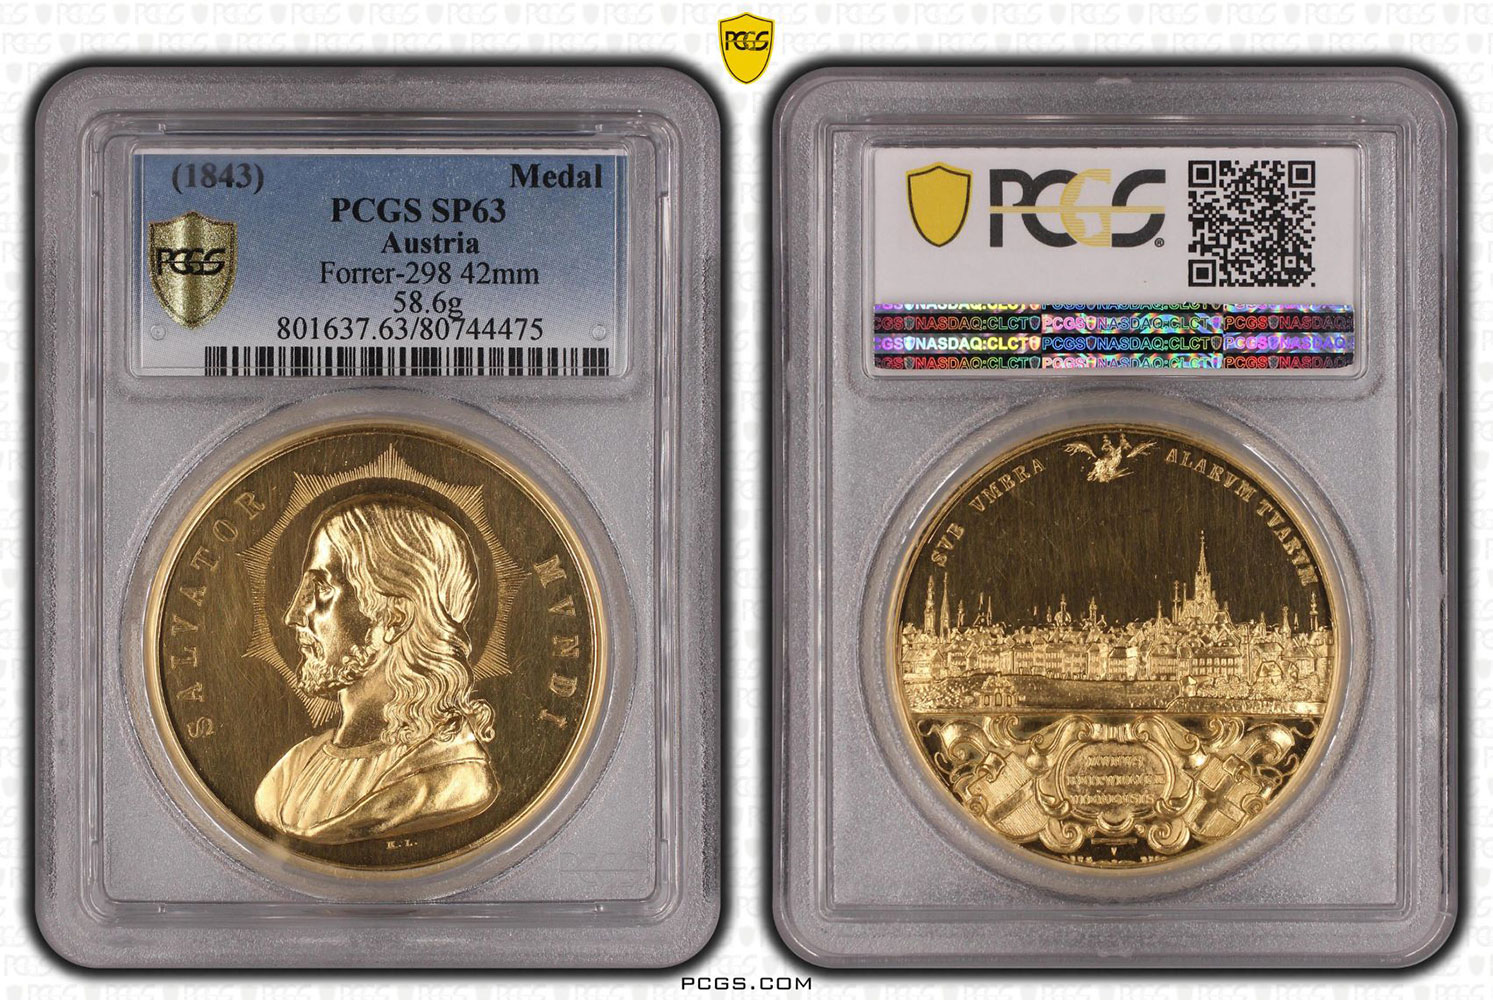 PCGS-Graded Coins Lead Heritage New York Sale